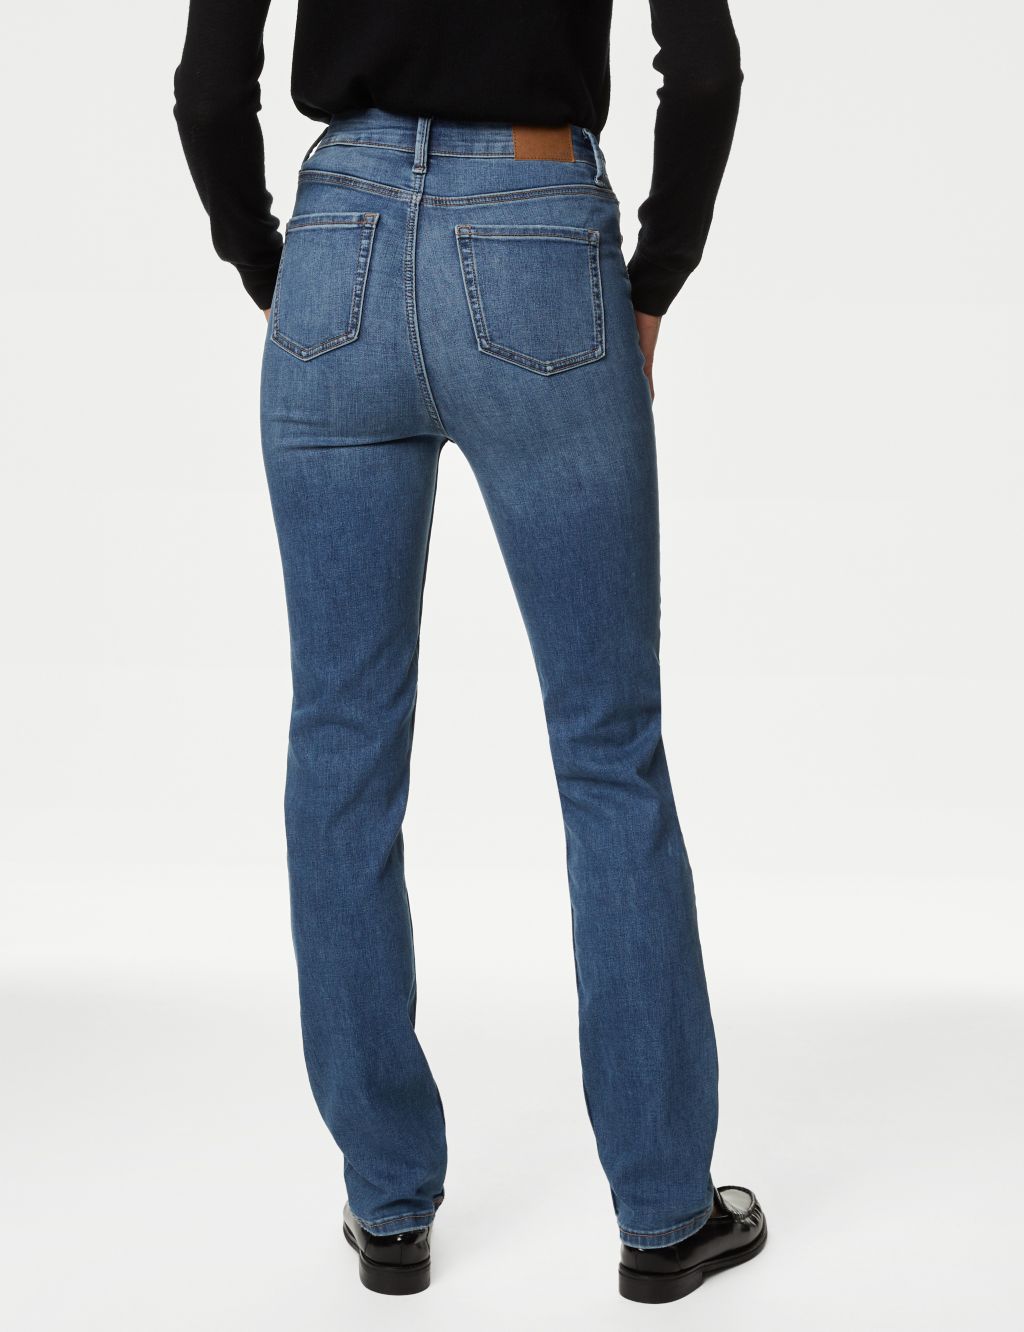 Sienna Supersoft Straight Leg Jeans image 4